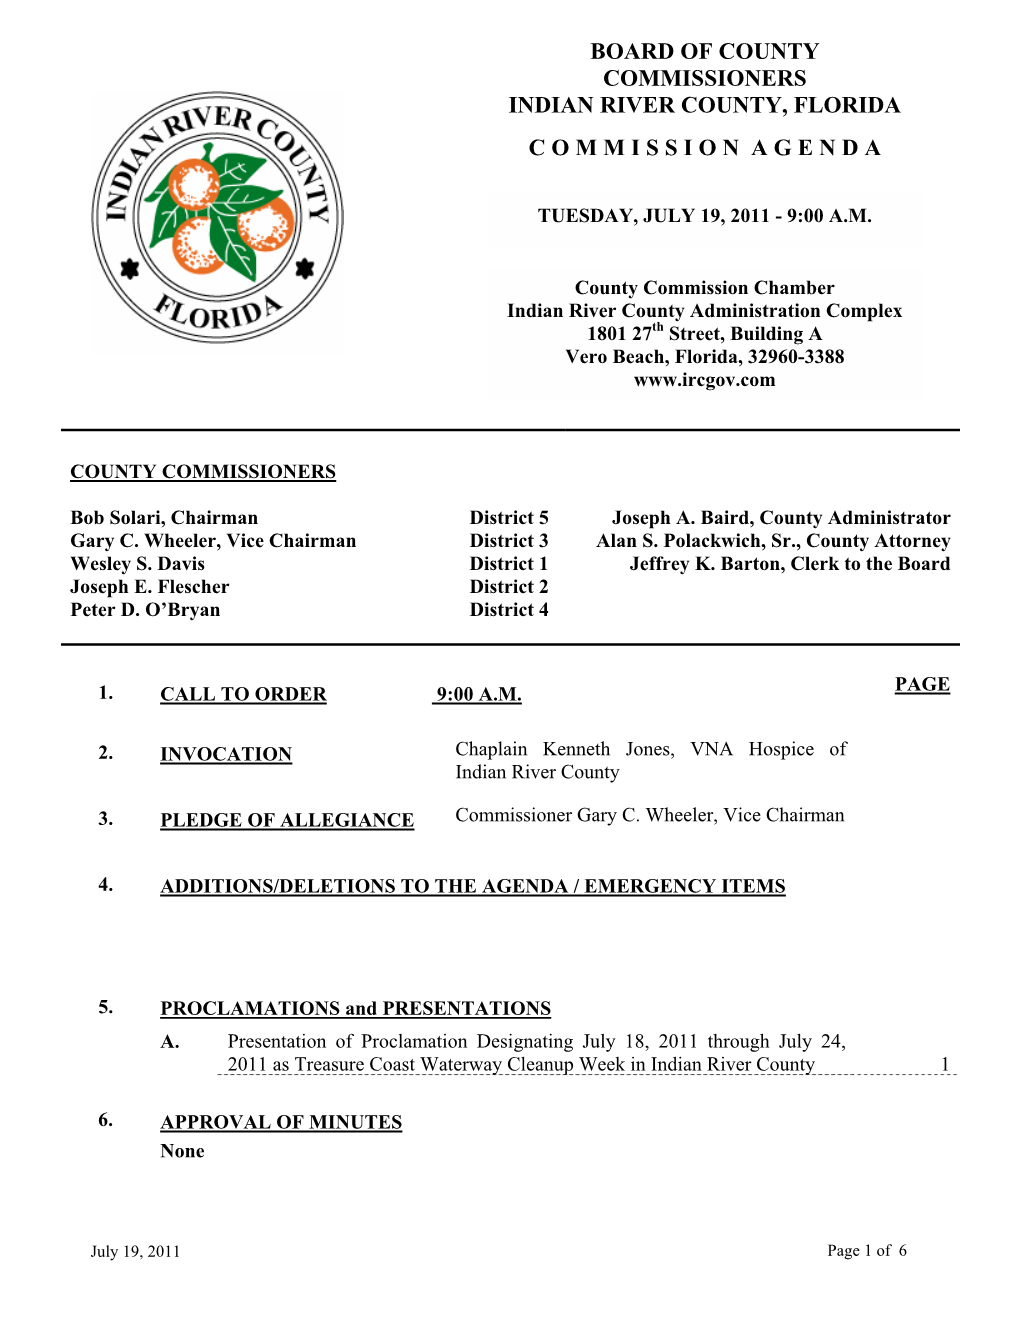 Indian River County Board of County Commissioners Meeting Agenda 07